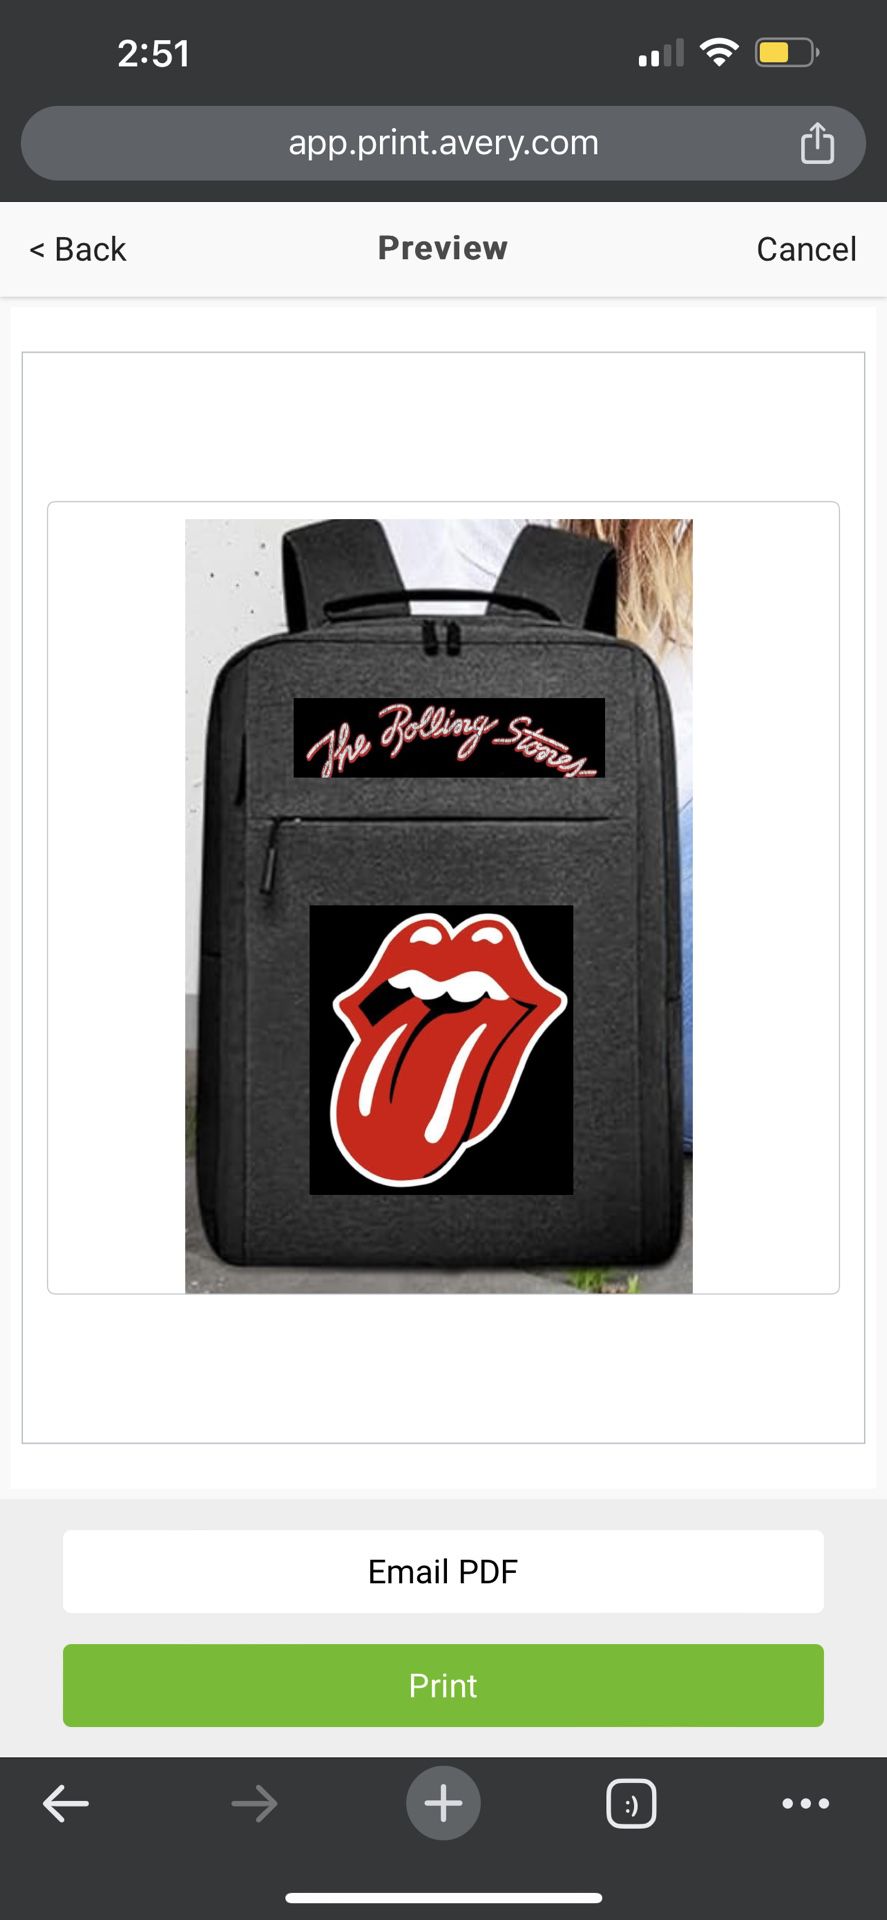 Rolling Stones Backpack